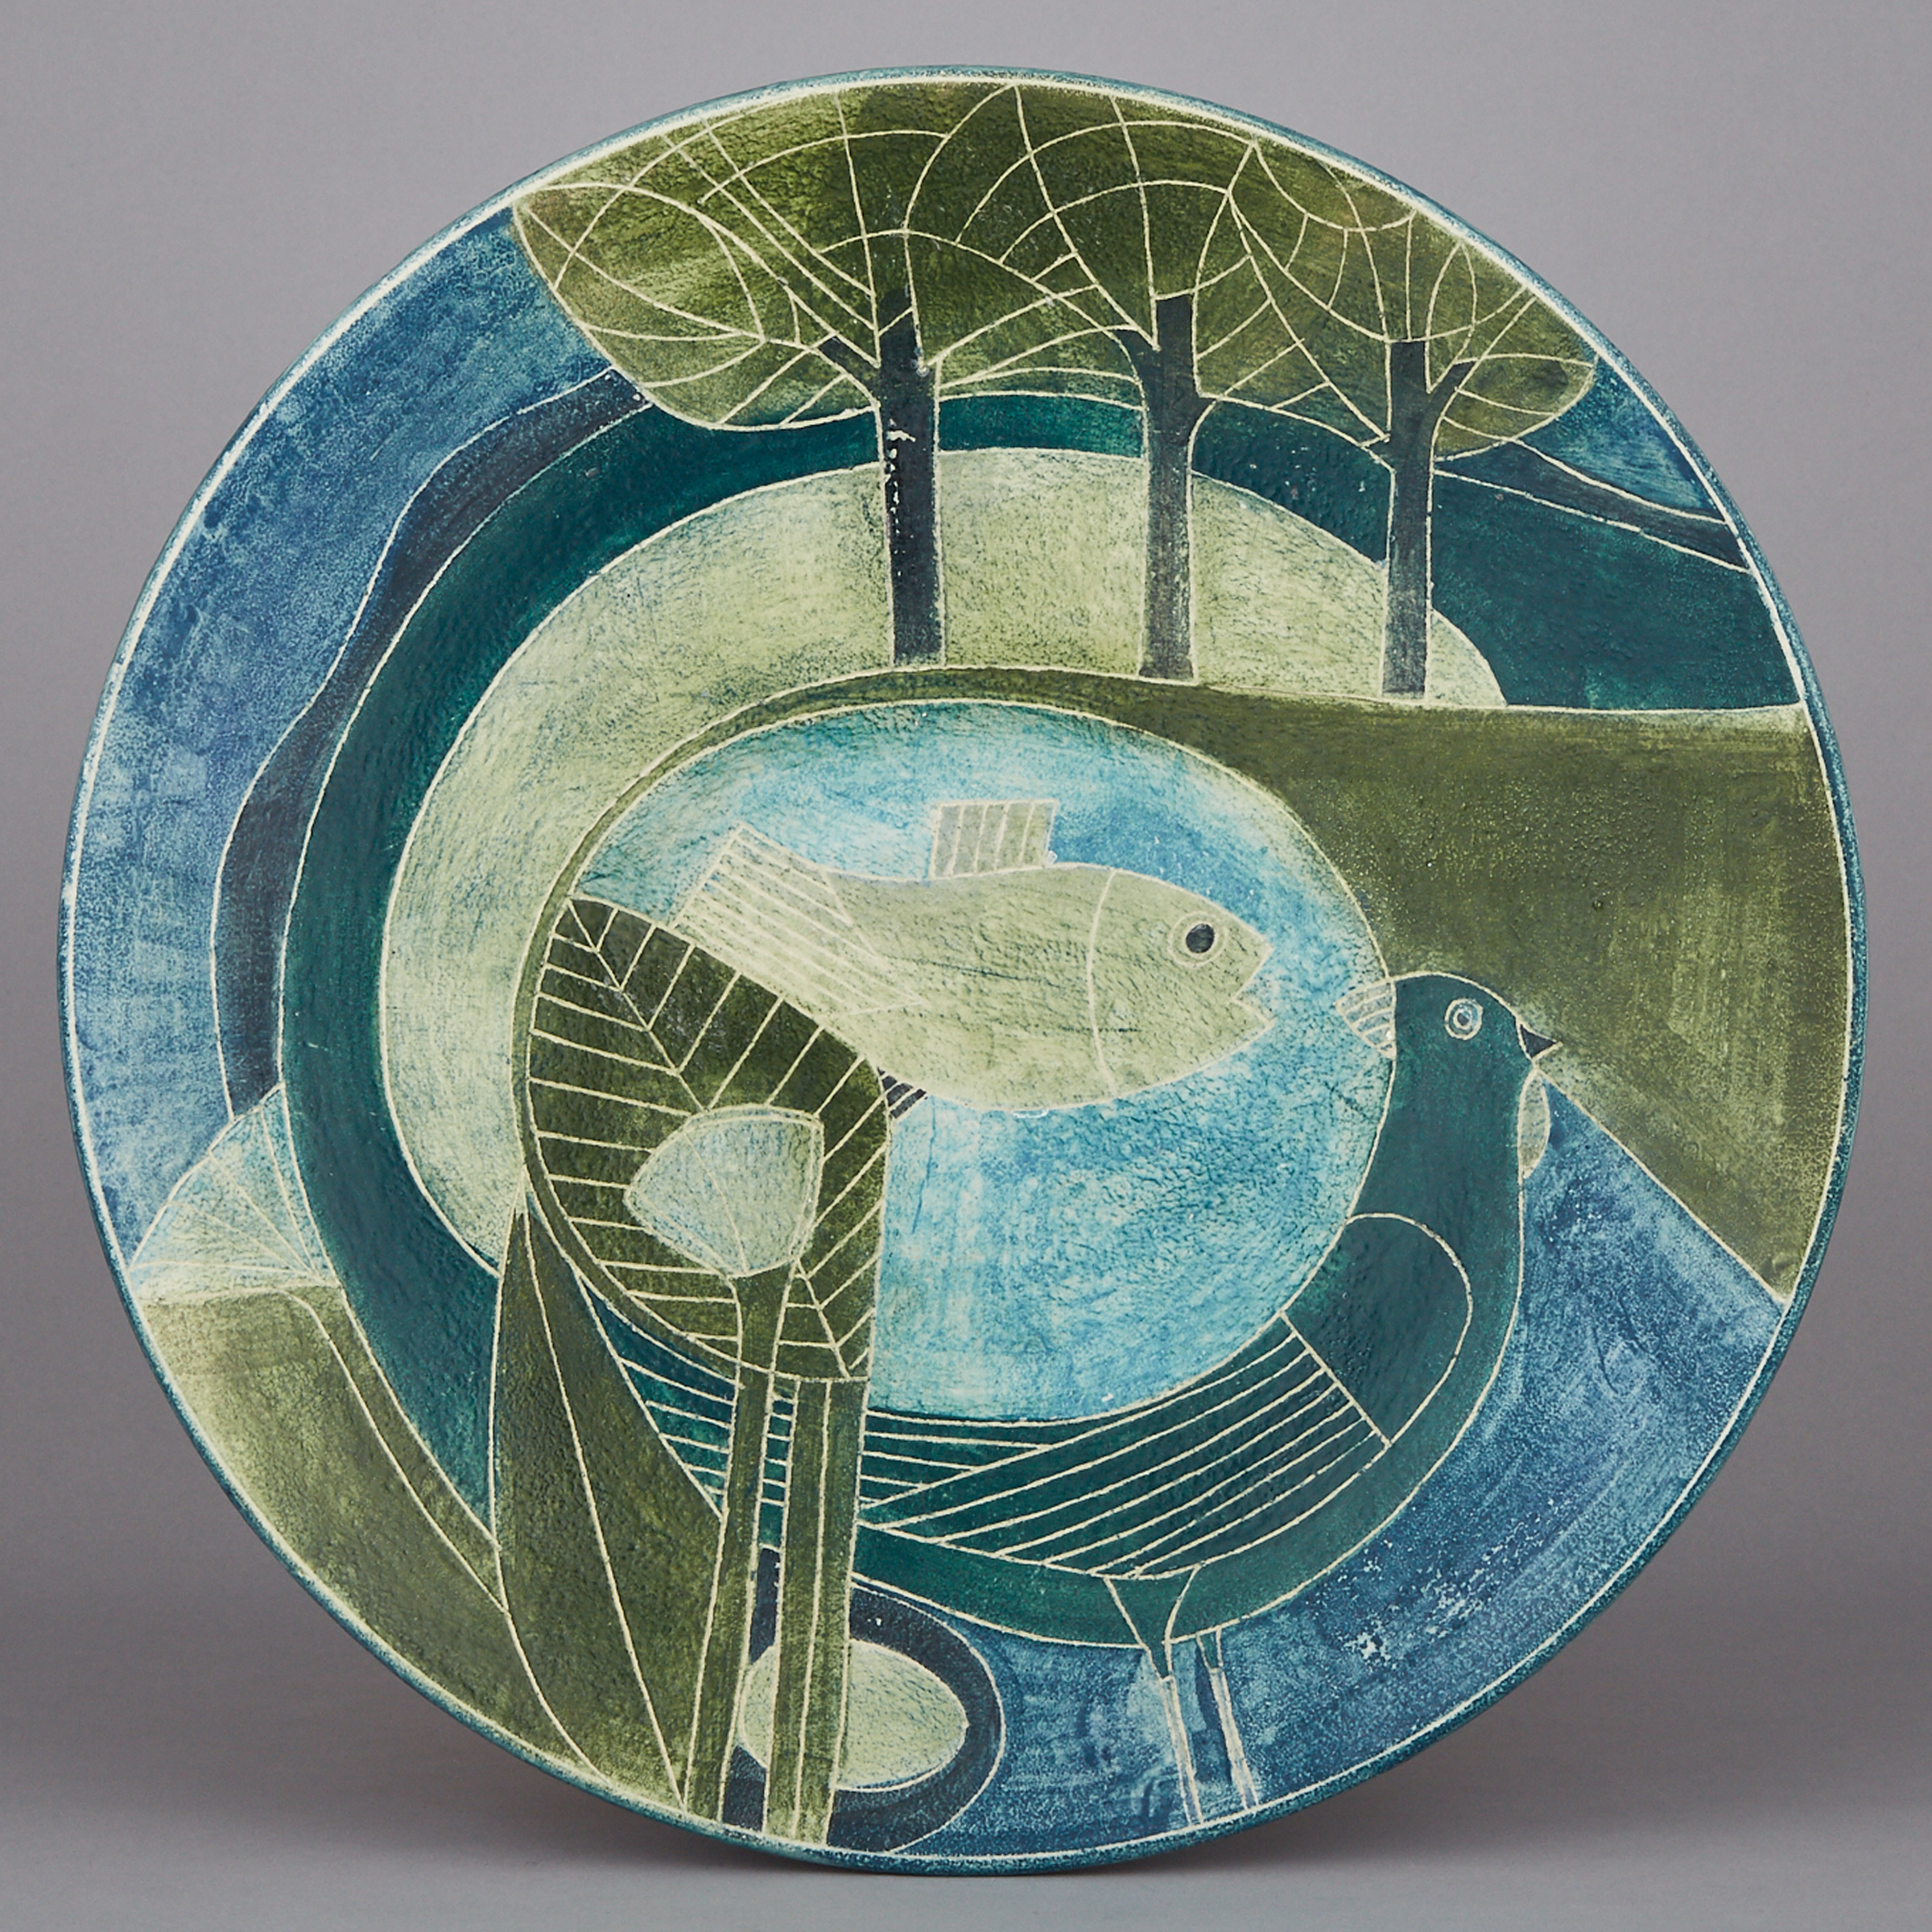 Brooklin Pottery Charger, Theo and Susan Harlander, c.1975-80